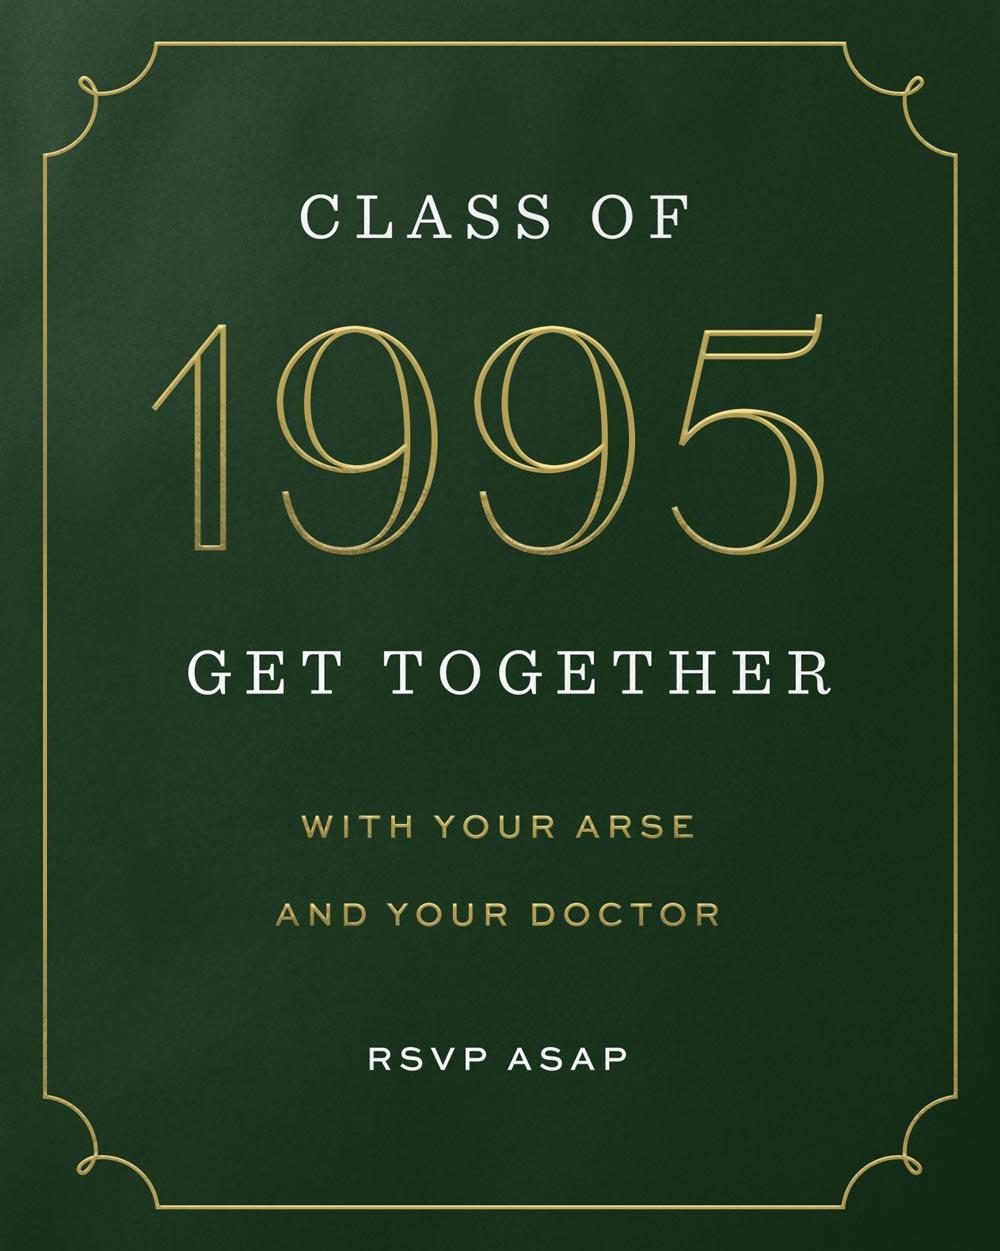 Class of 1995: Get together with your arse and your doctor. RSVP ASAP.